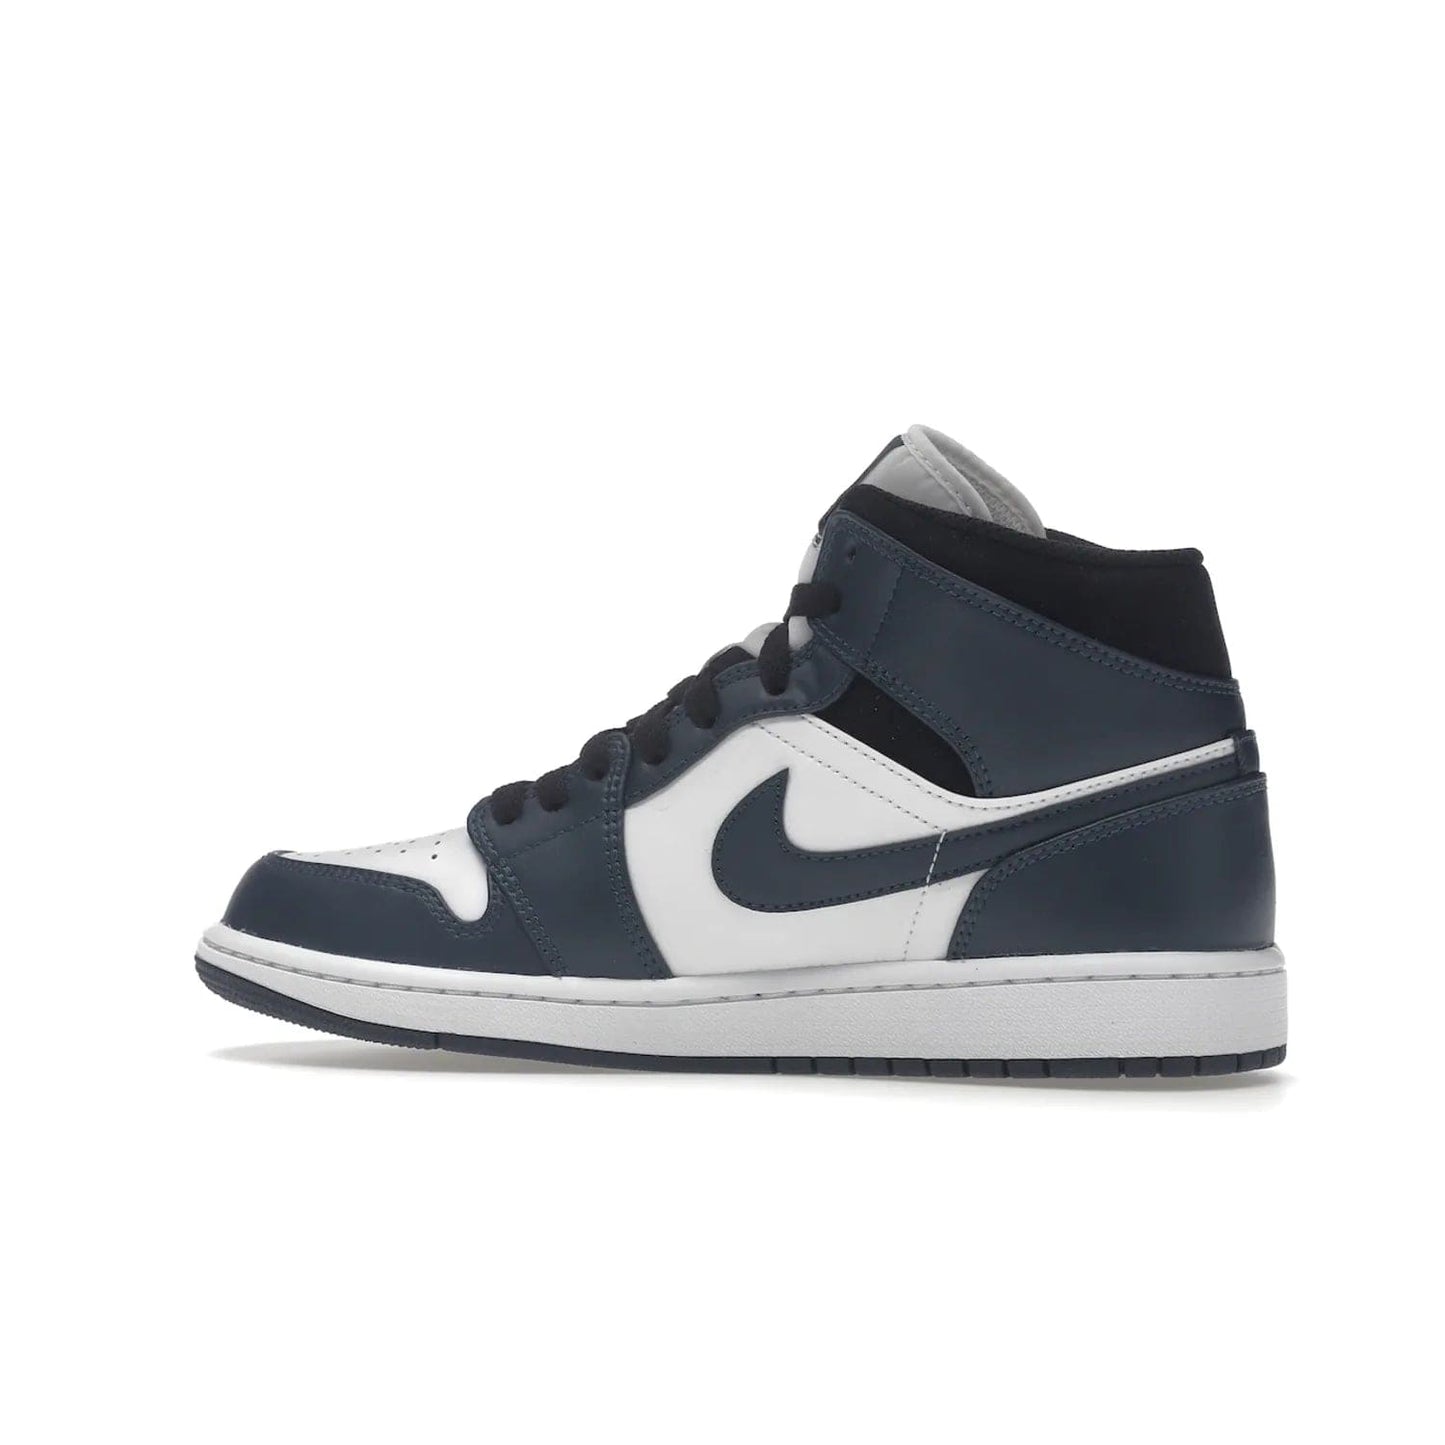 Jordan 1 Mid Armory Navy - Image 21 - Only at www.BallersClubKickz.com - The Jordan 1 Mid Armory Navy: classic basketball sneaker with soft white leather upper, deep navy blue overlays, and black leather ankle detailing. Iconic style with Jordan Wings logo and Jumpman label.